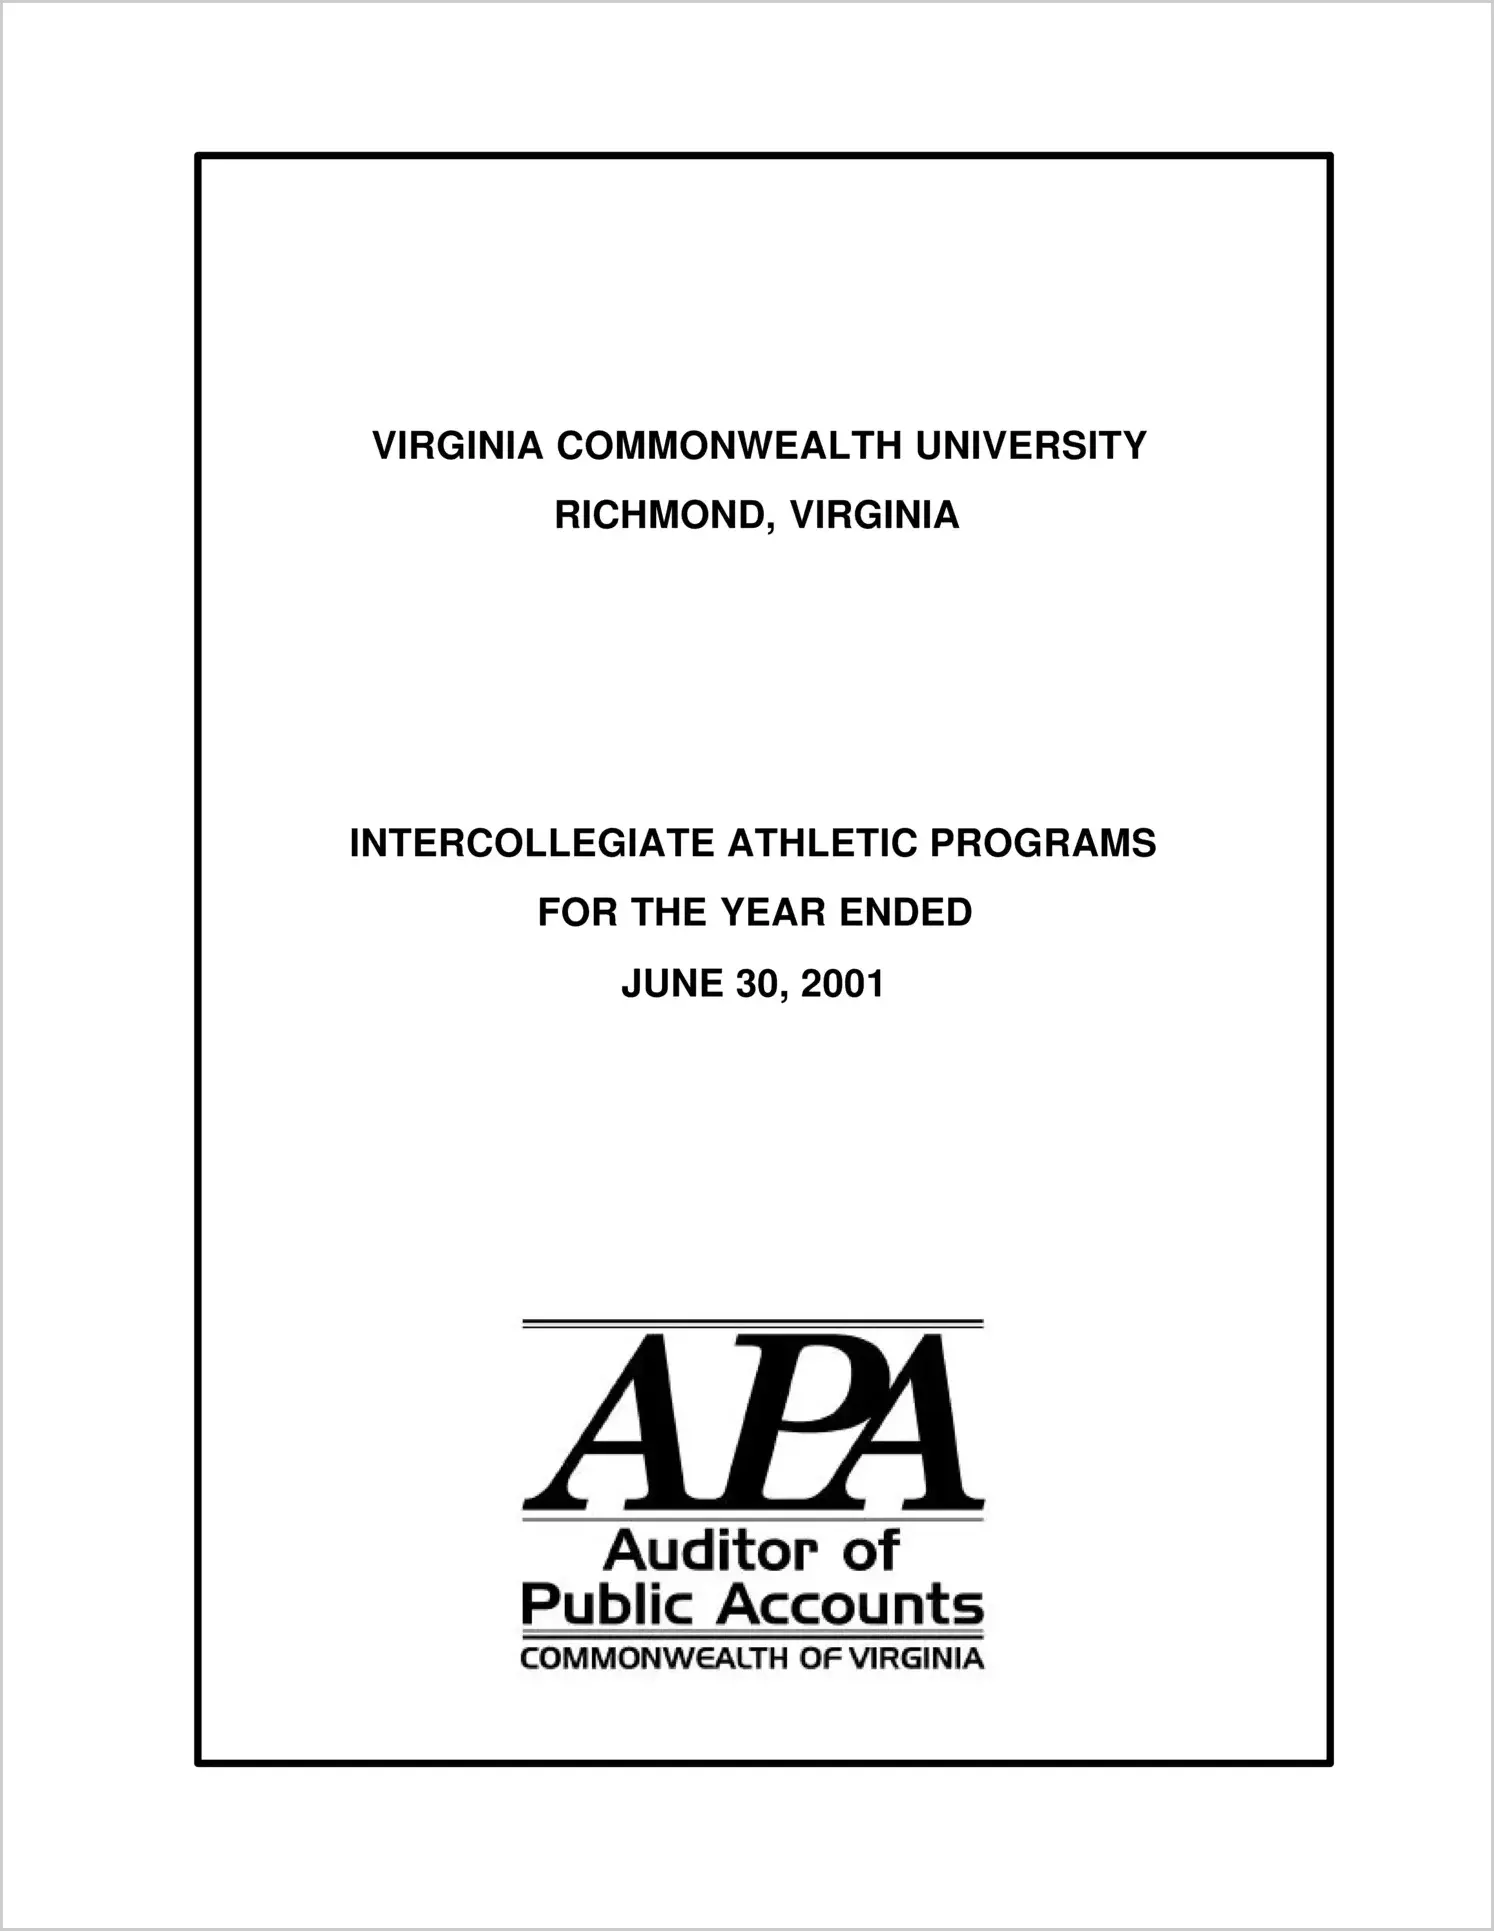 Virginia Commonwealth University Intercollegiate Athletic Programs for the year ended June 30, 2001